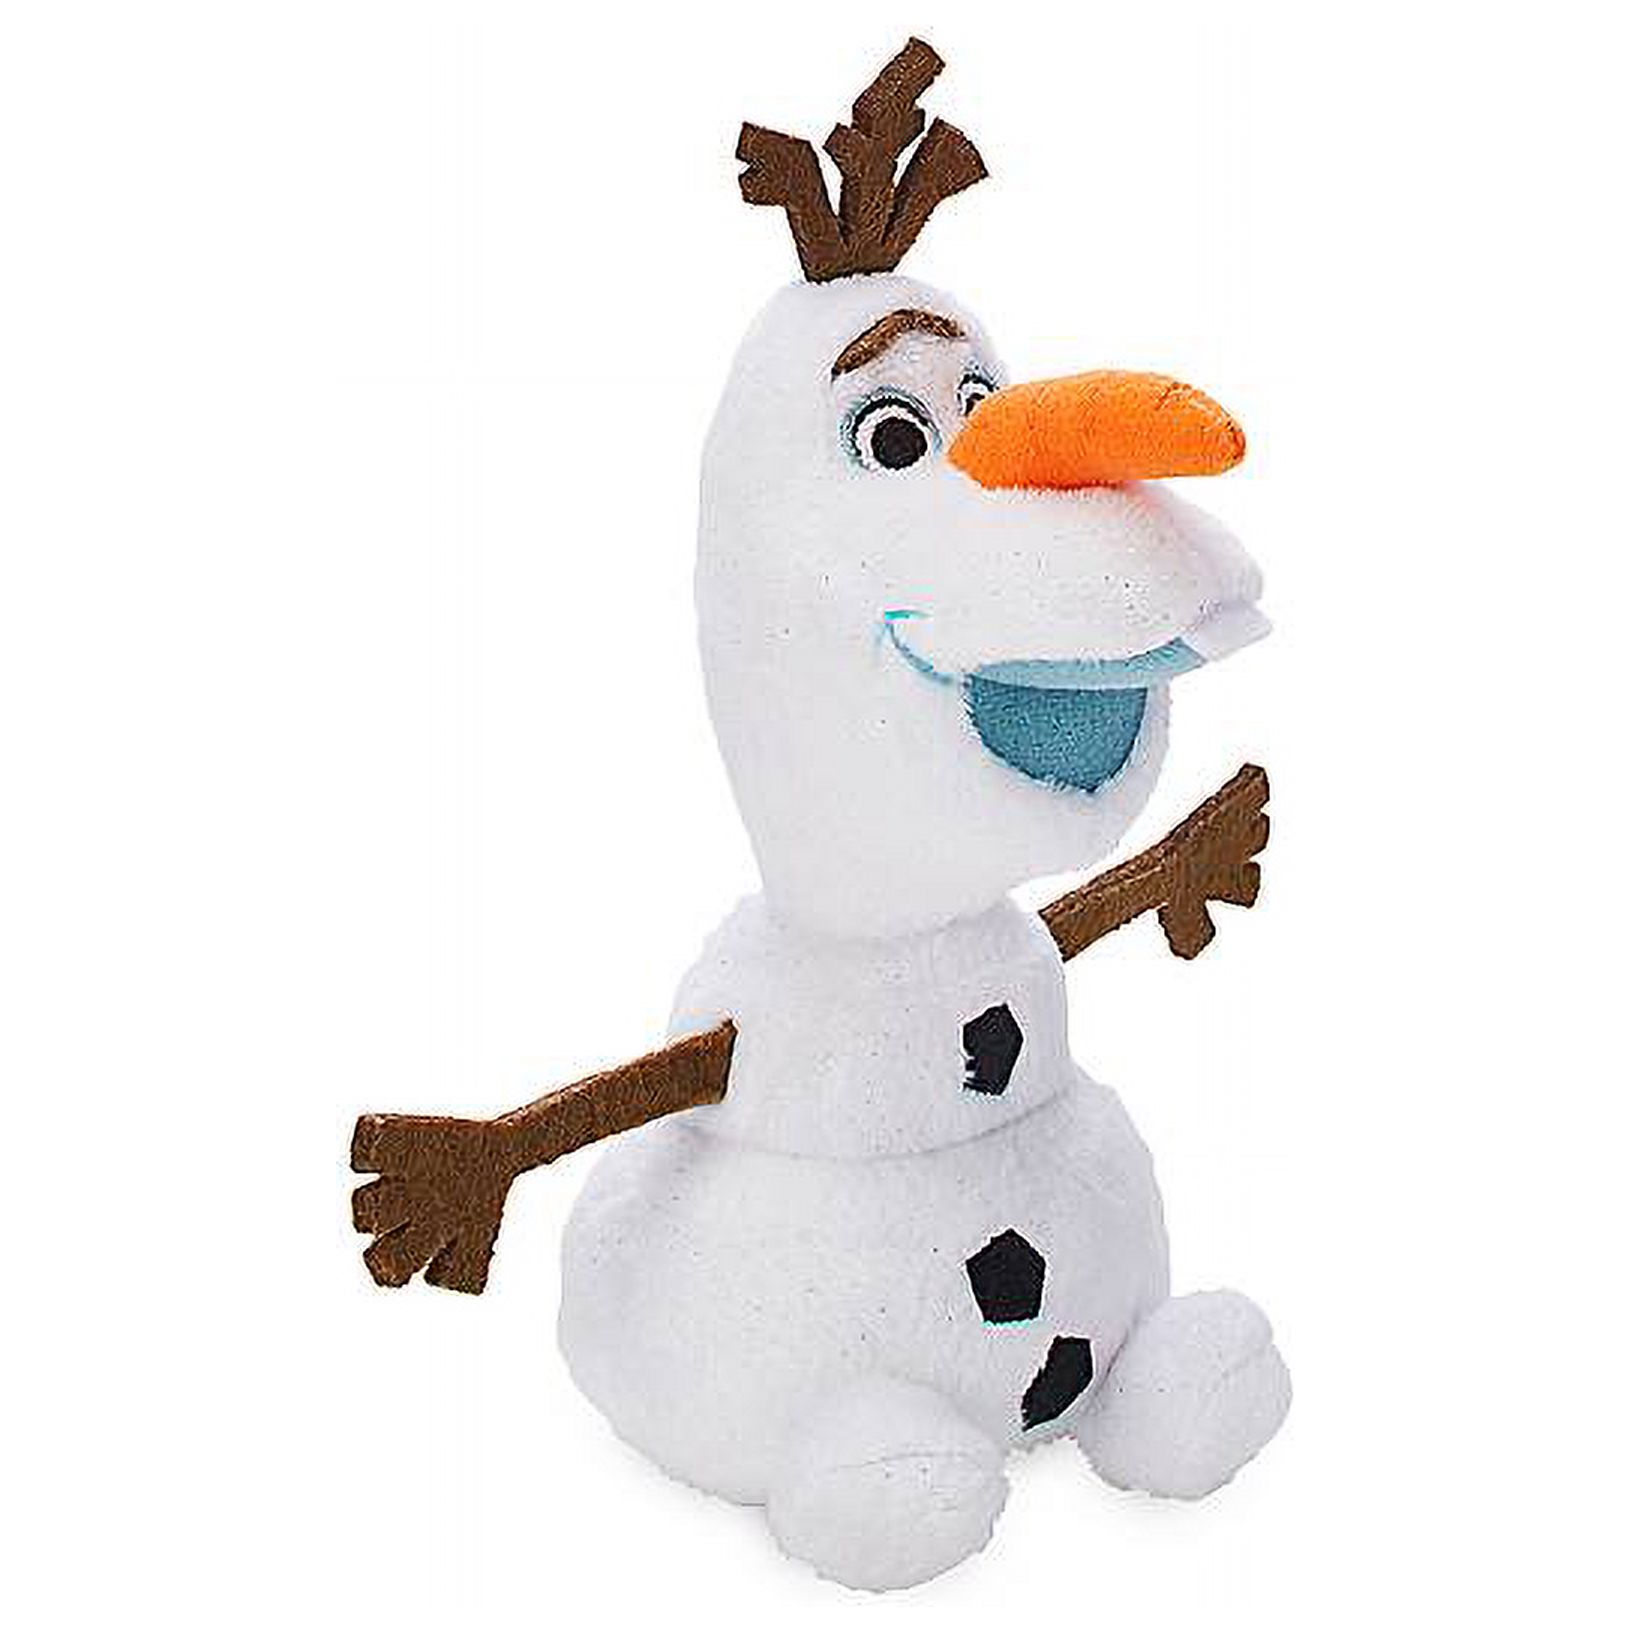 Disney Olaf Plush Frozen 2 Mini Bean Bag 6 1/2'' New with Tags - image 2 of 3